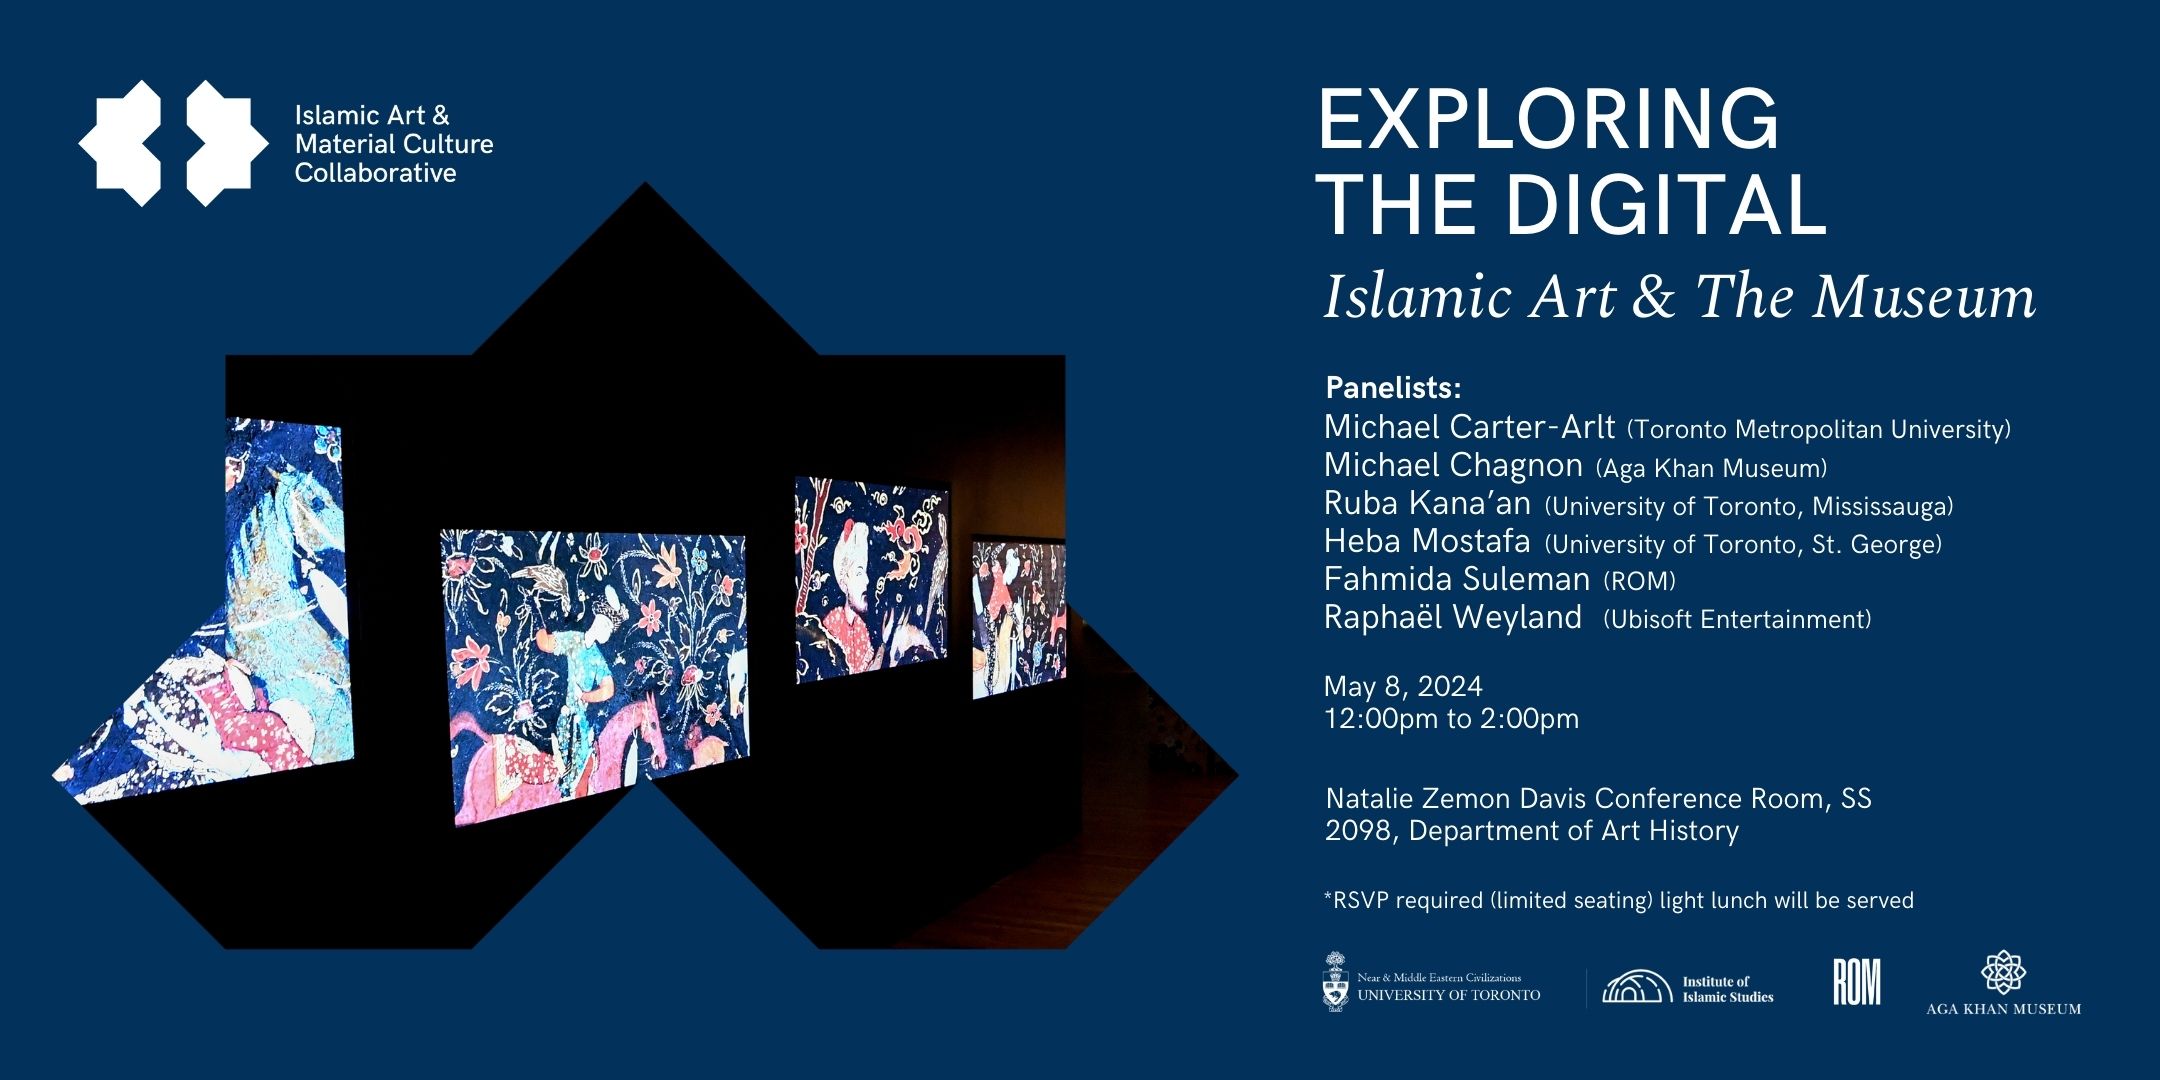 [MAY 8, 2024] EXPLORING THE DIGITAL: ISLAMIC ART AND THE MUSEUM